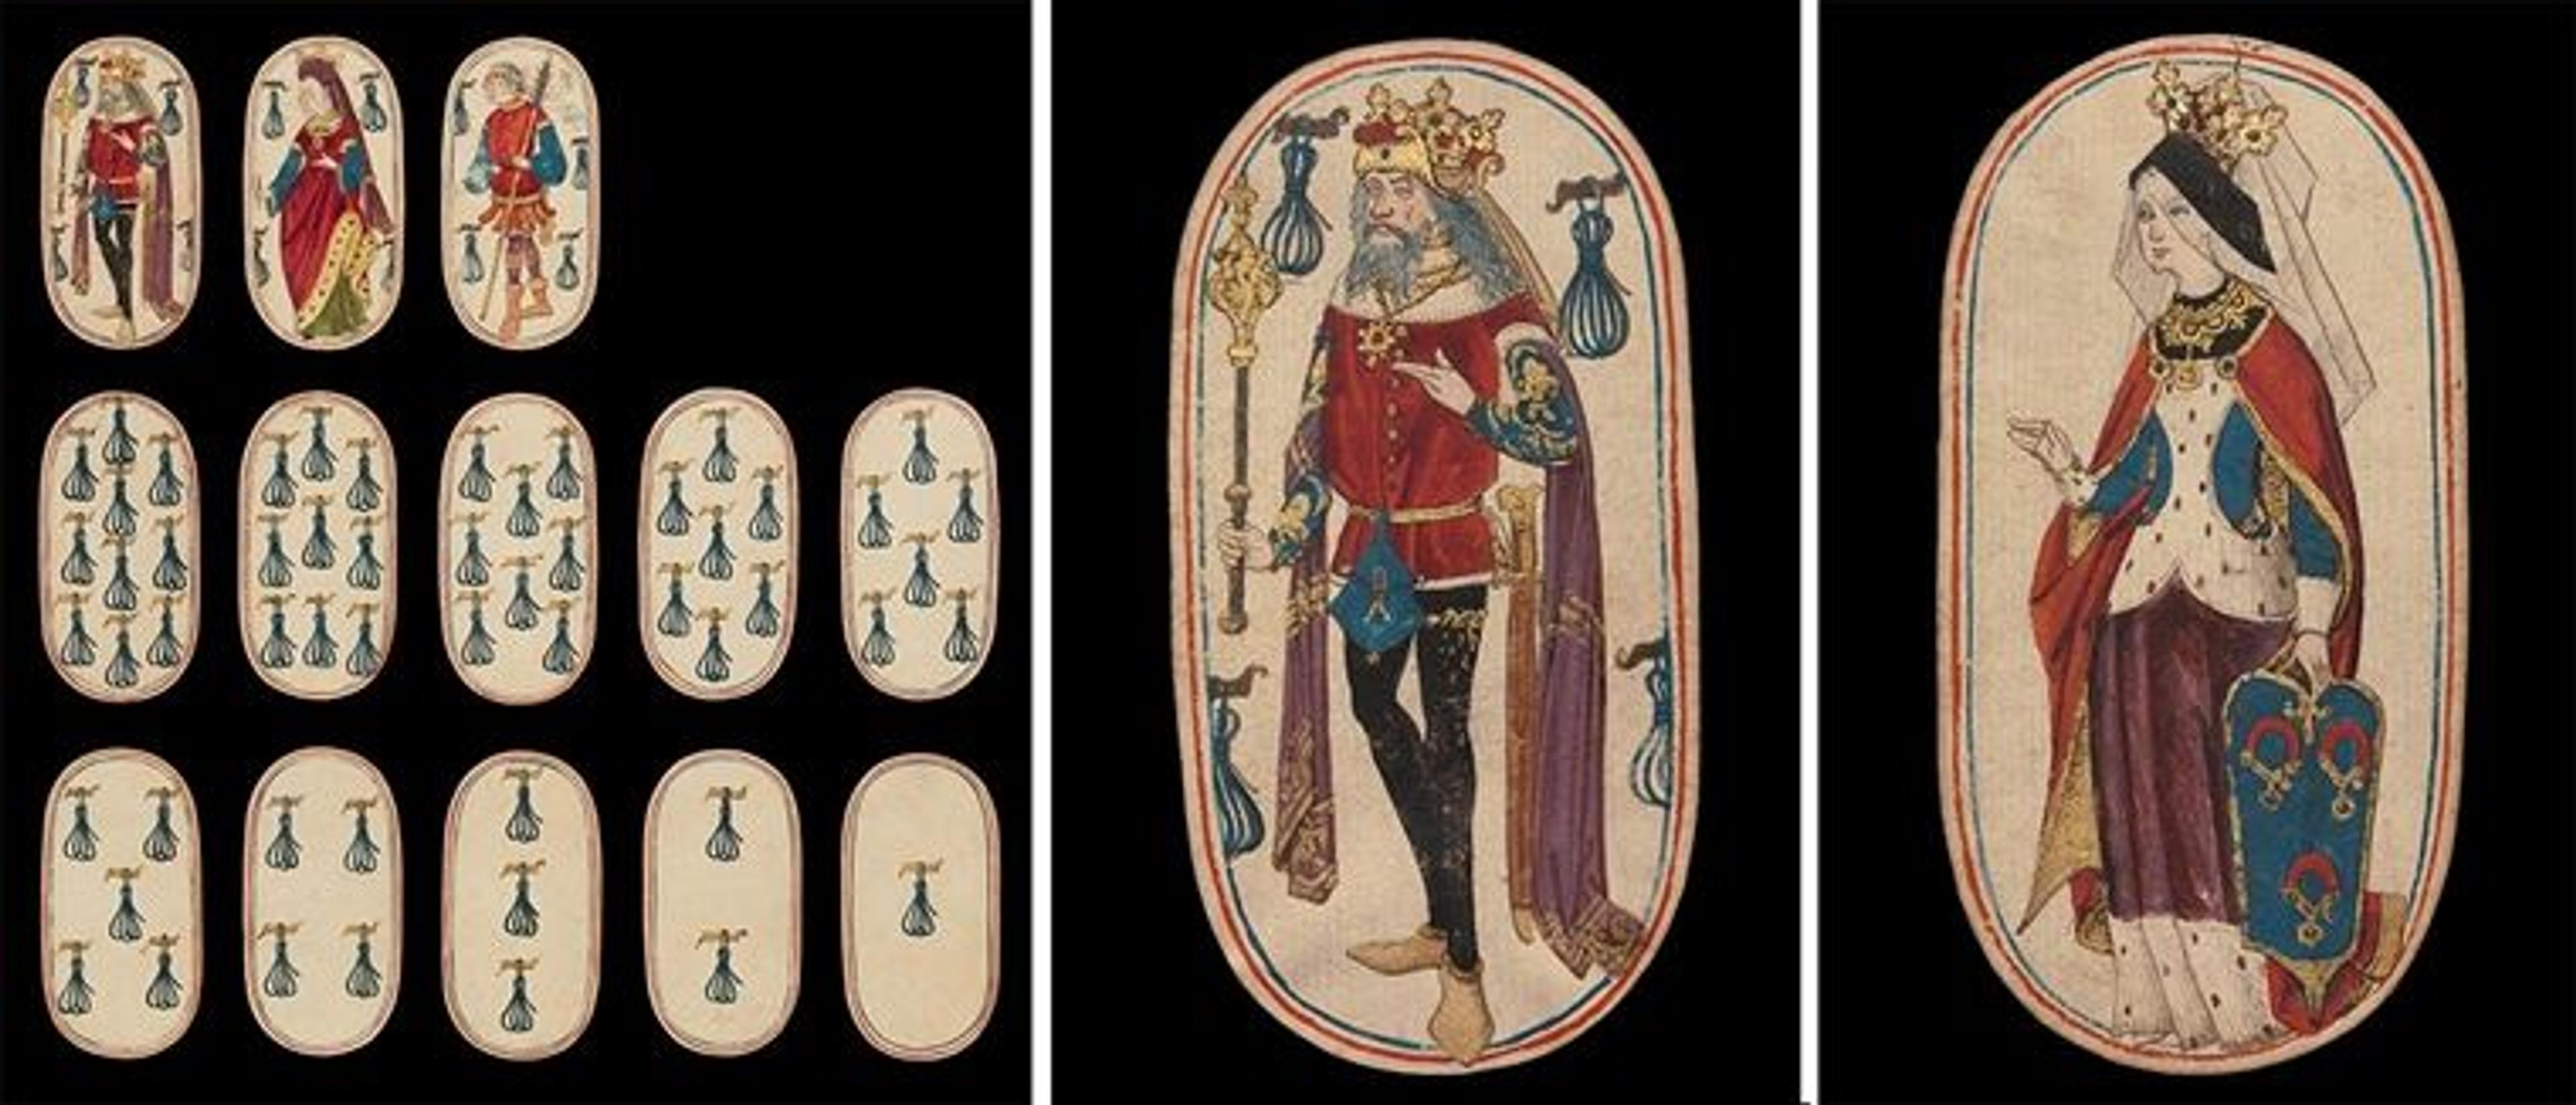 A set of oval-shaped medieval playing cards, some featuring a king and queen, and others featuring different numbers of knots of rope.